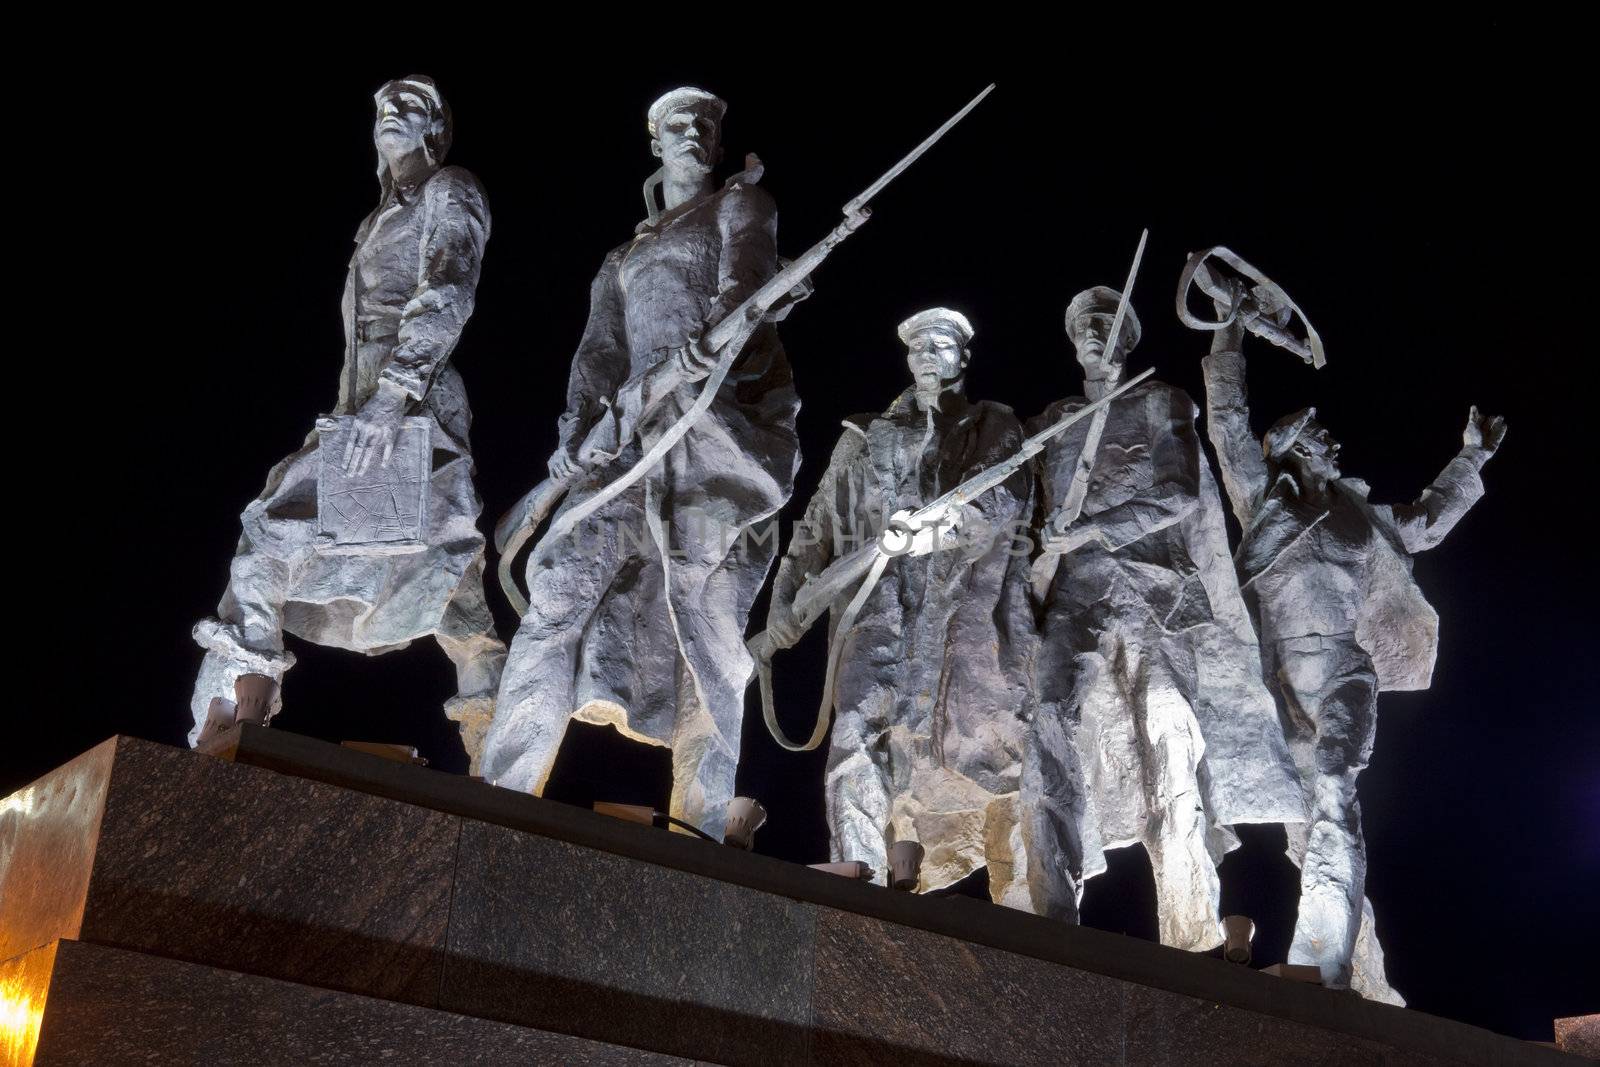 Detail of the Monument to the Heroic Defenders of Leningrad by chrisdorney